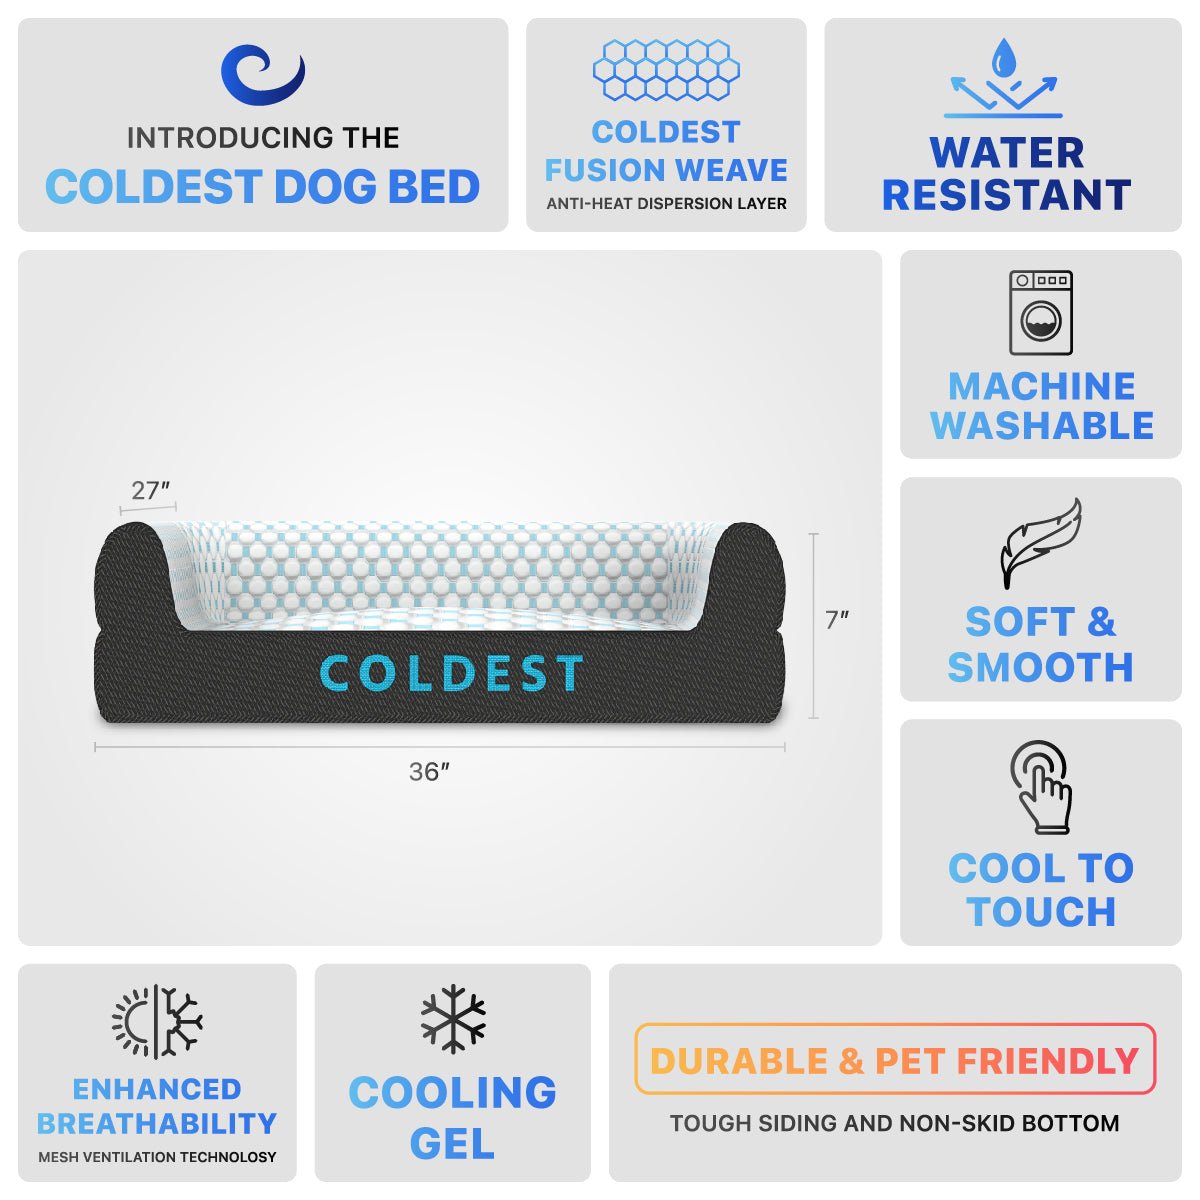 The Coldest Cozy Dog Bed